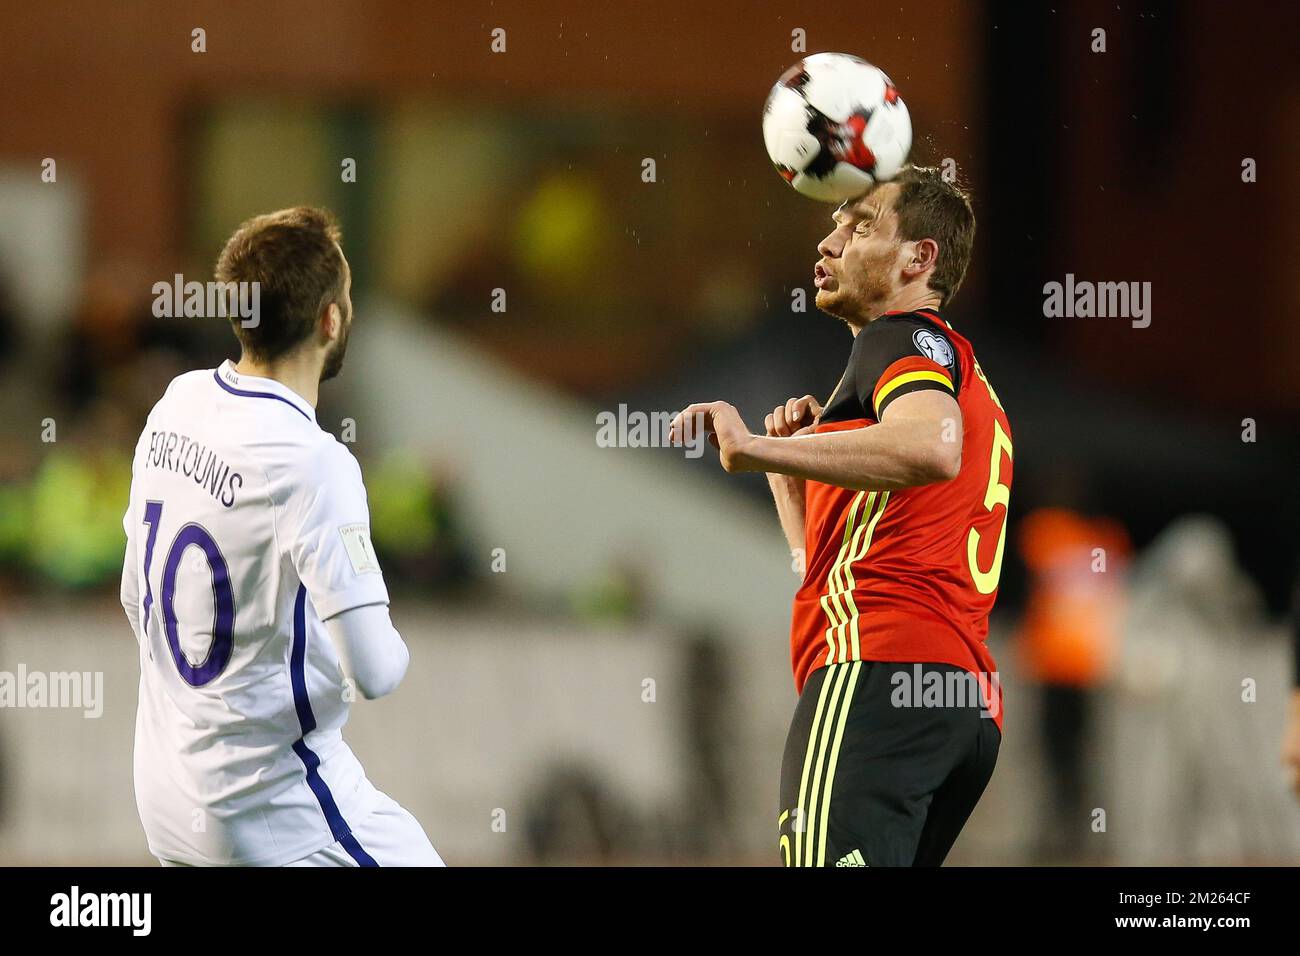 Greece's Fortounis and Belgium's Jan Vertonghen fight for the ball during a World Cup 2018 qualification game between Belgium's Red Devils Greece, Saturday 25 March 2017, at the King Baudouin